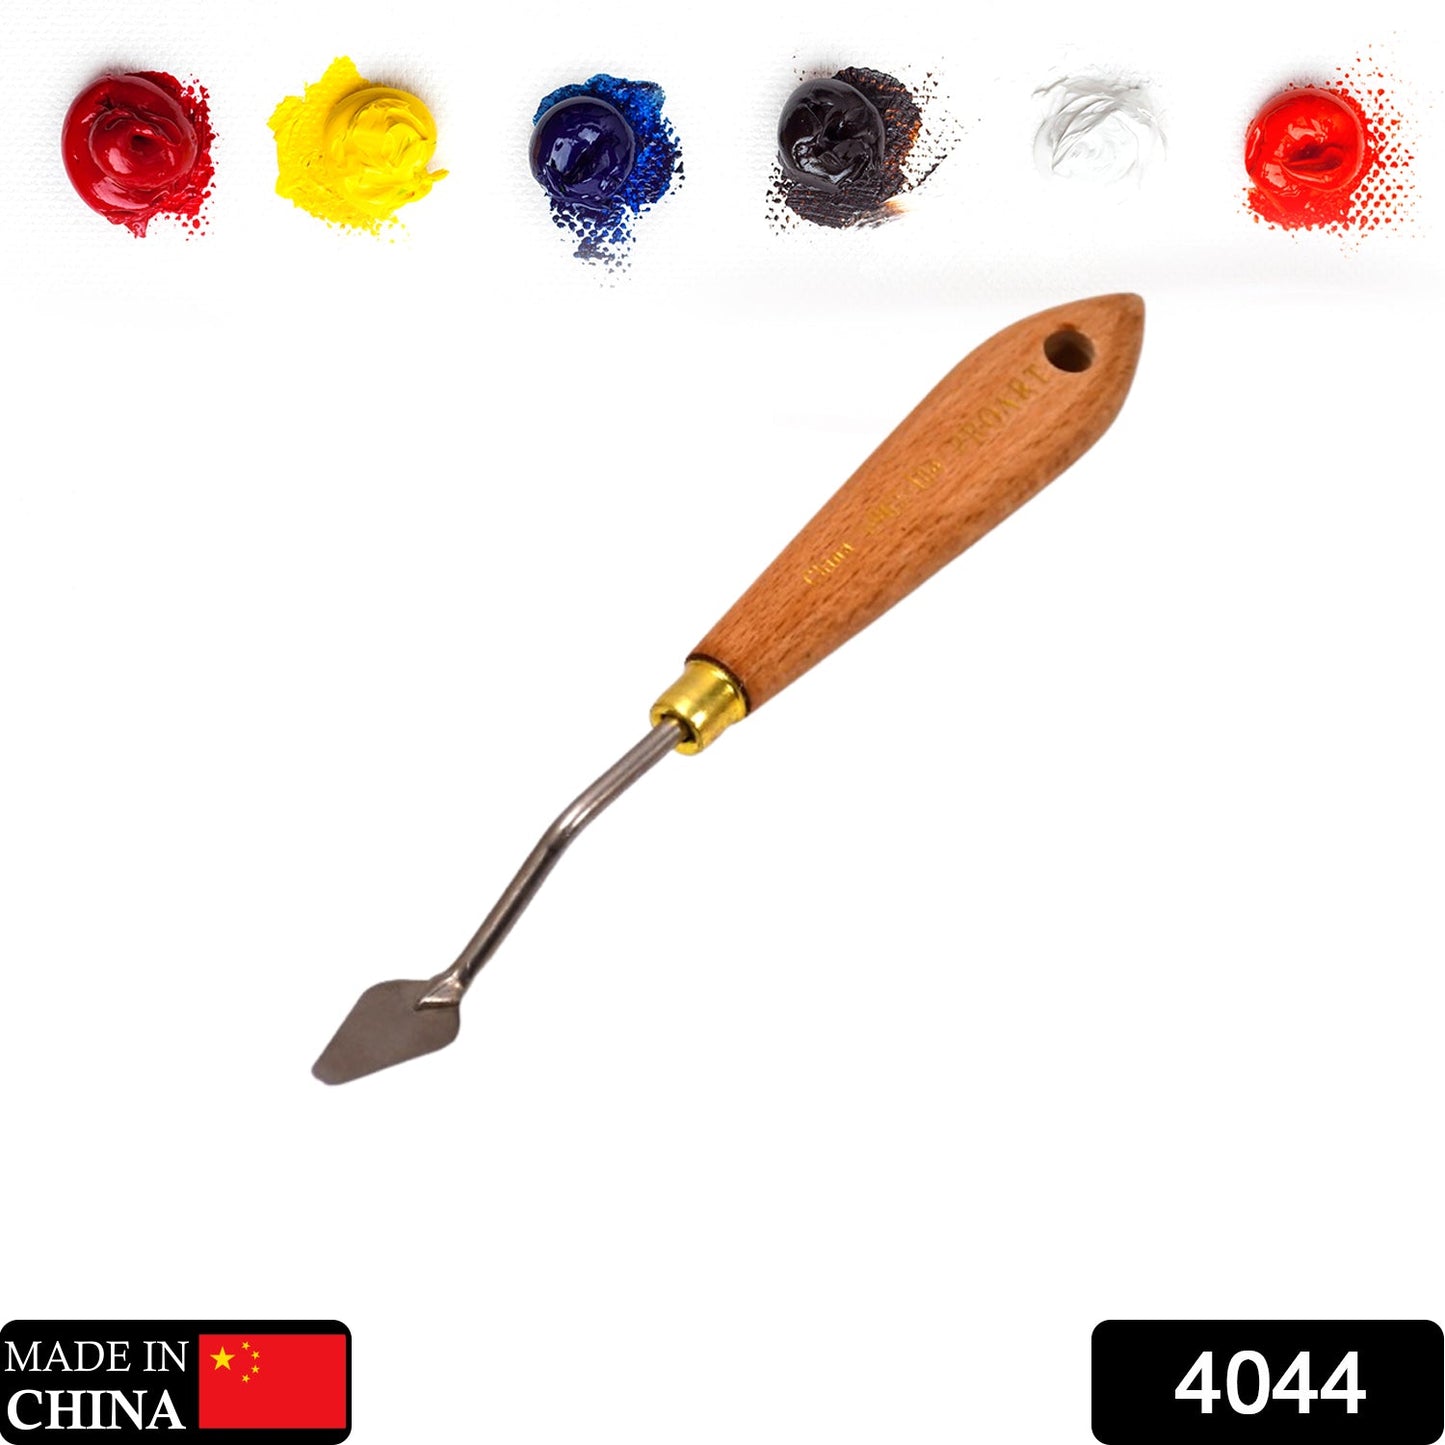 4044 Small Stainless Steel Artists Palette Knife, Spatula Palette Knife Paint Mixing Scraper, Thin and Flexible Art Tools for Oil Painting, Acrylic Mixing, Etc DeoDap